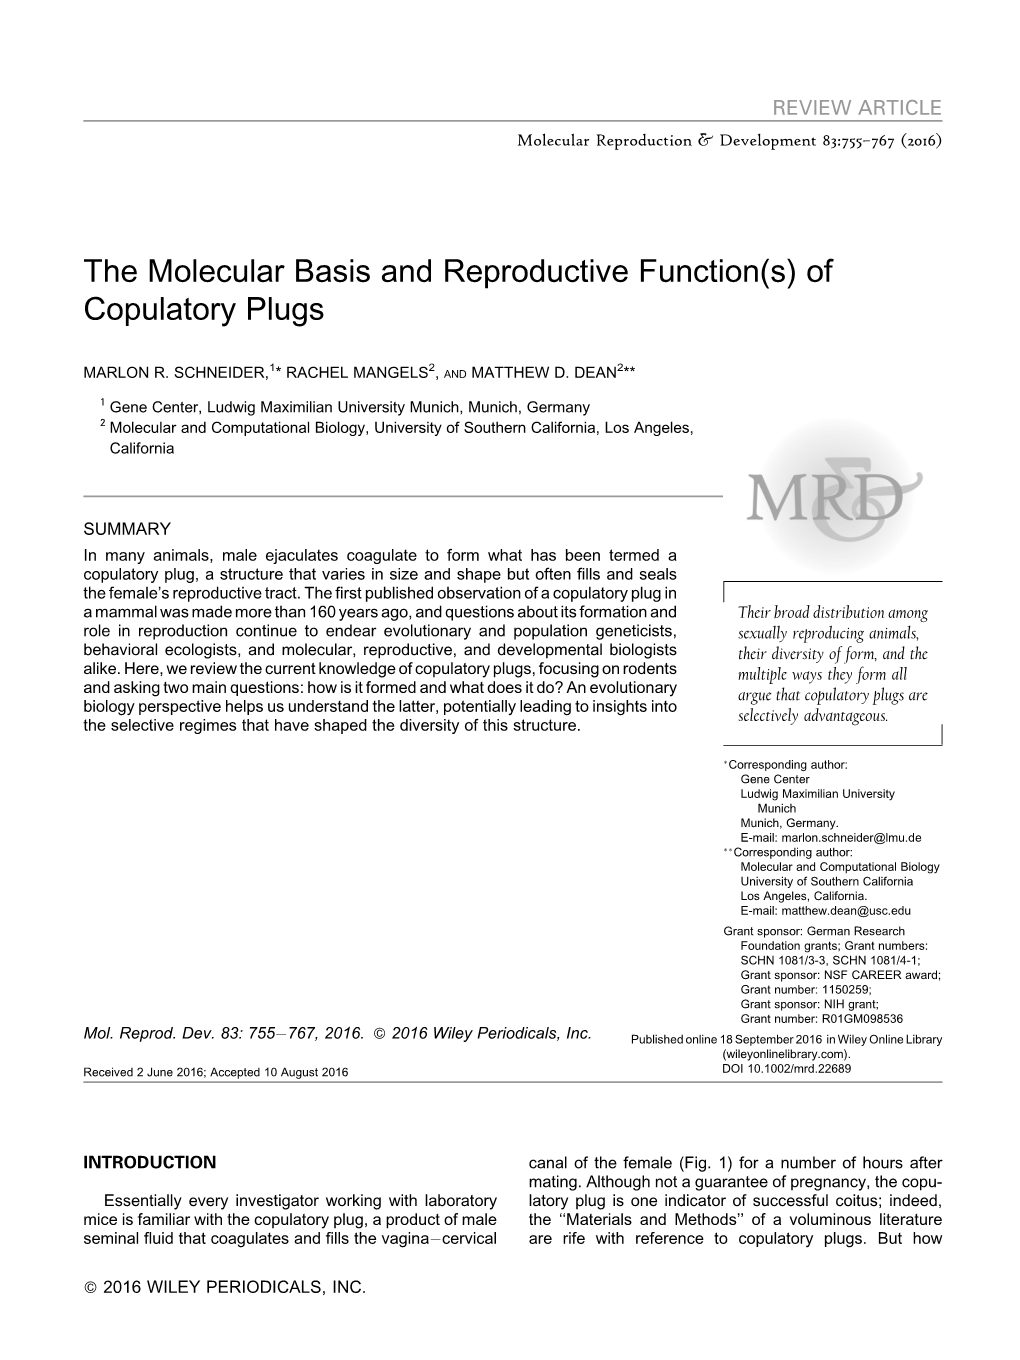 The Molecular Basis and Reproductive Function(S) of Copulatory Plugs